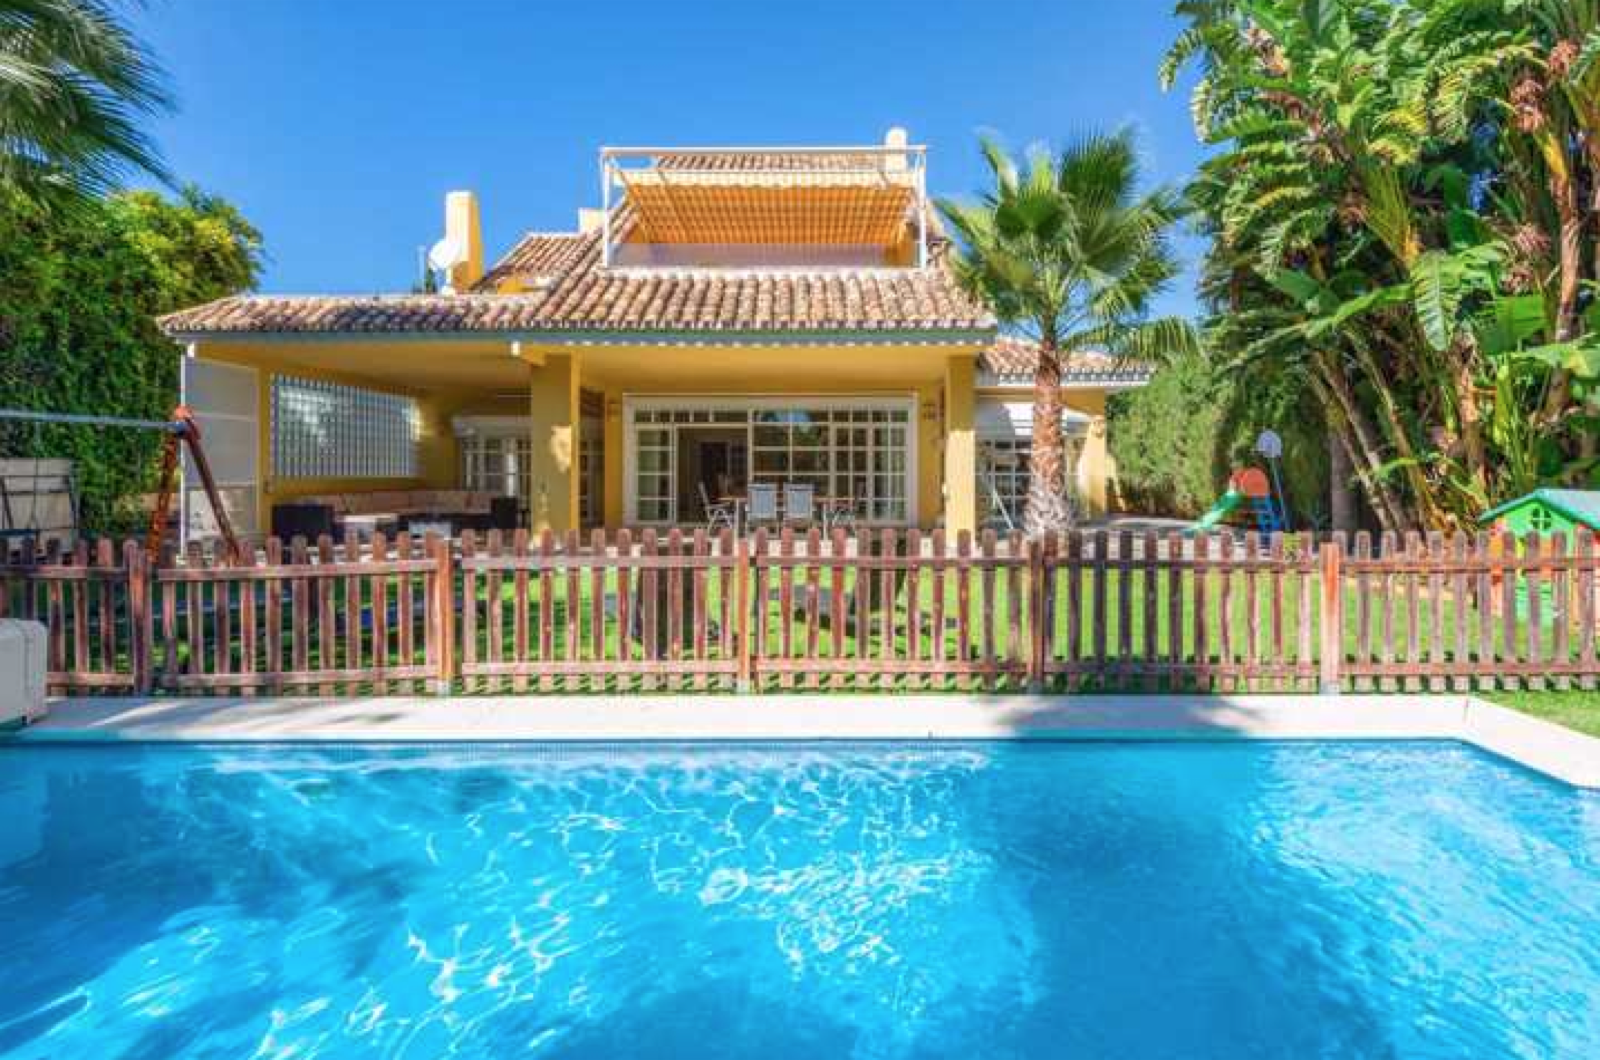 Lovely villa walking distance to amenities and the beach in Guadalmina Baja